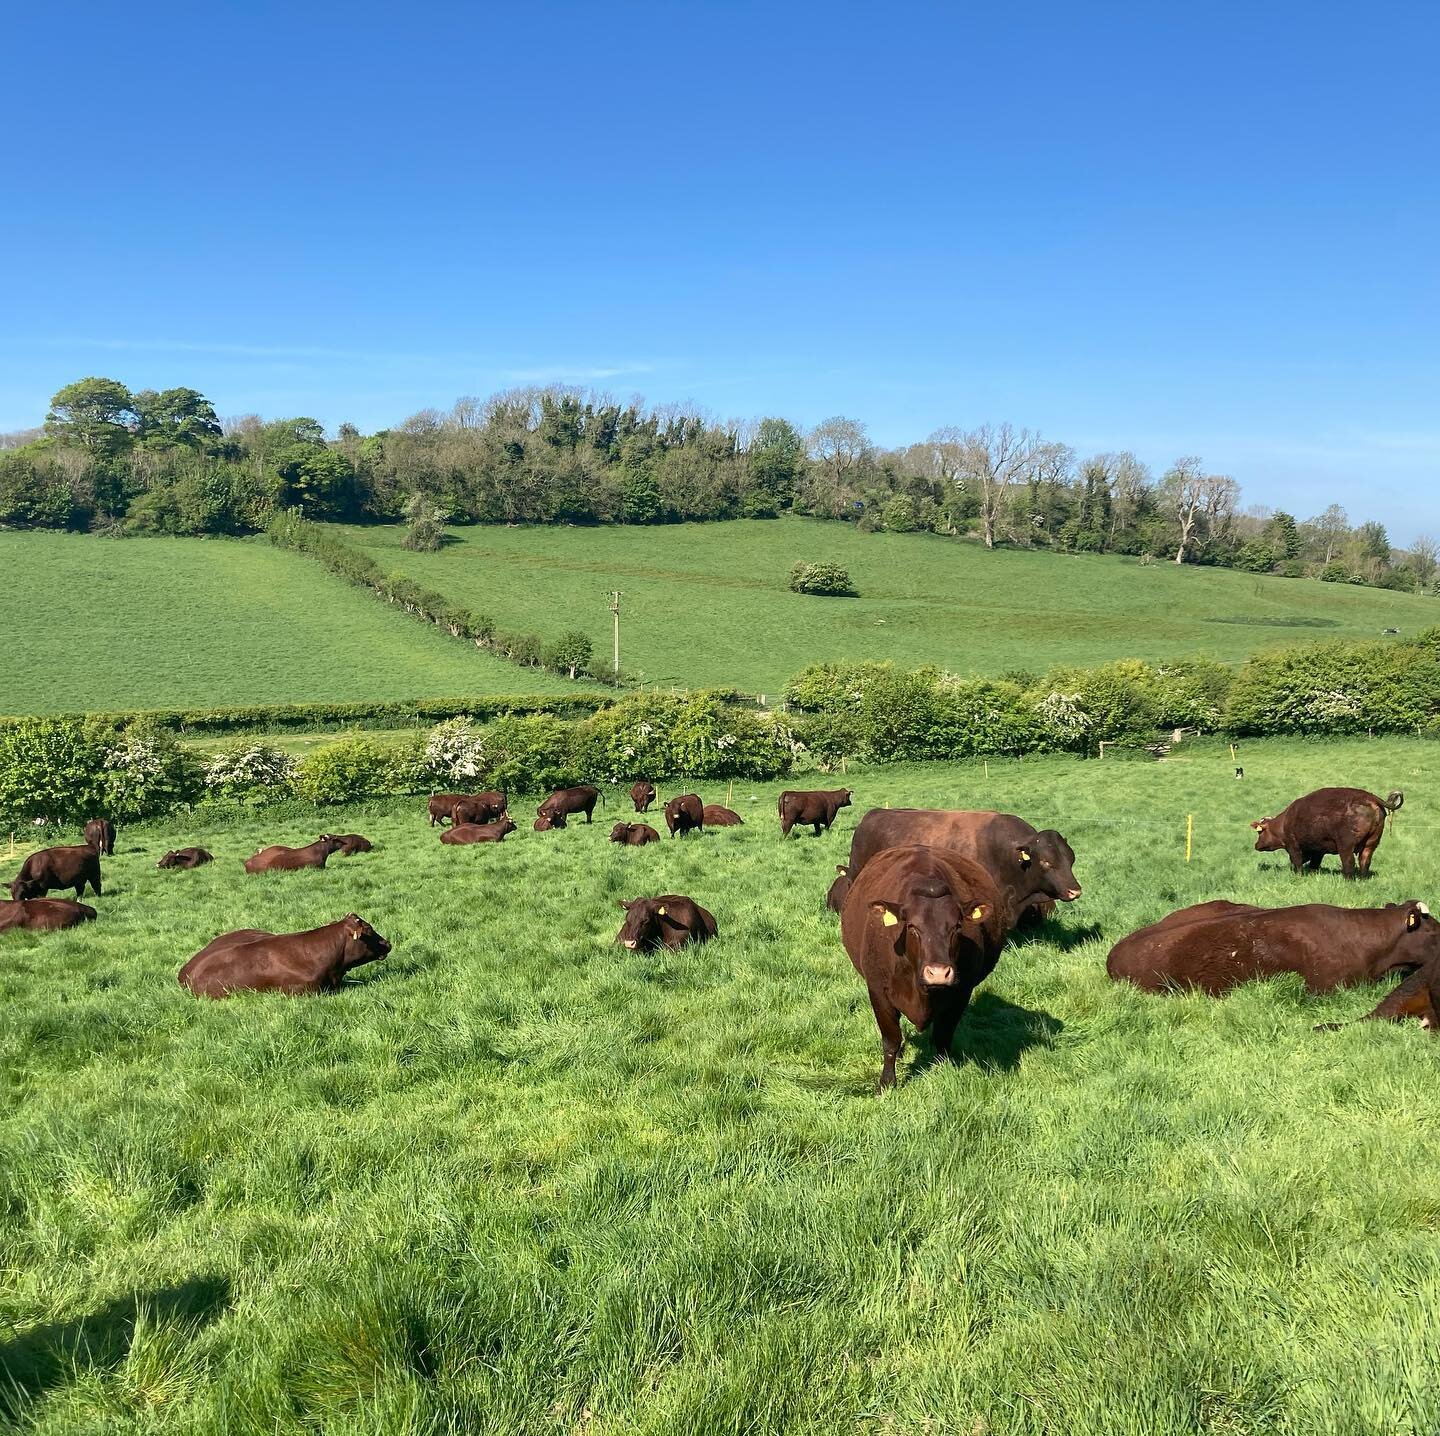 Girls are keeping us waiting. They look so uncomfortable but no real action yet! 🐂💚
#calving2022 #sussexcows #grassfed #farmingwithnature #camillaandroly #saddlescombefarm